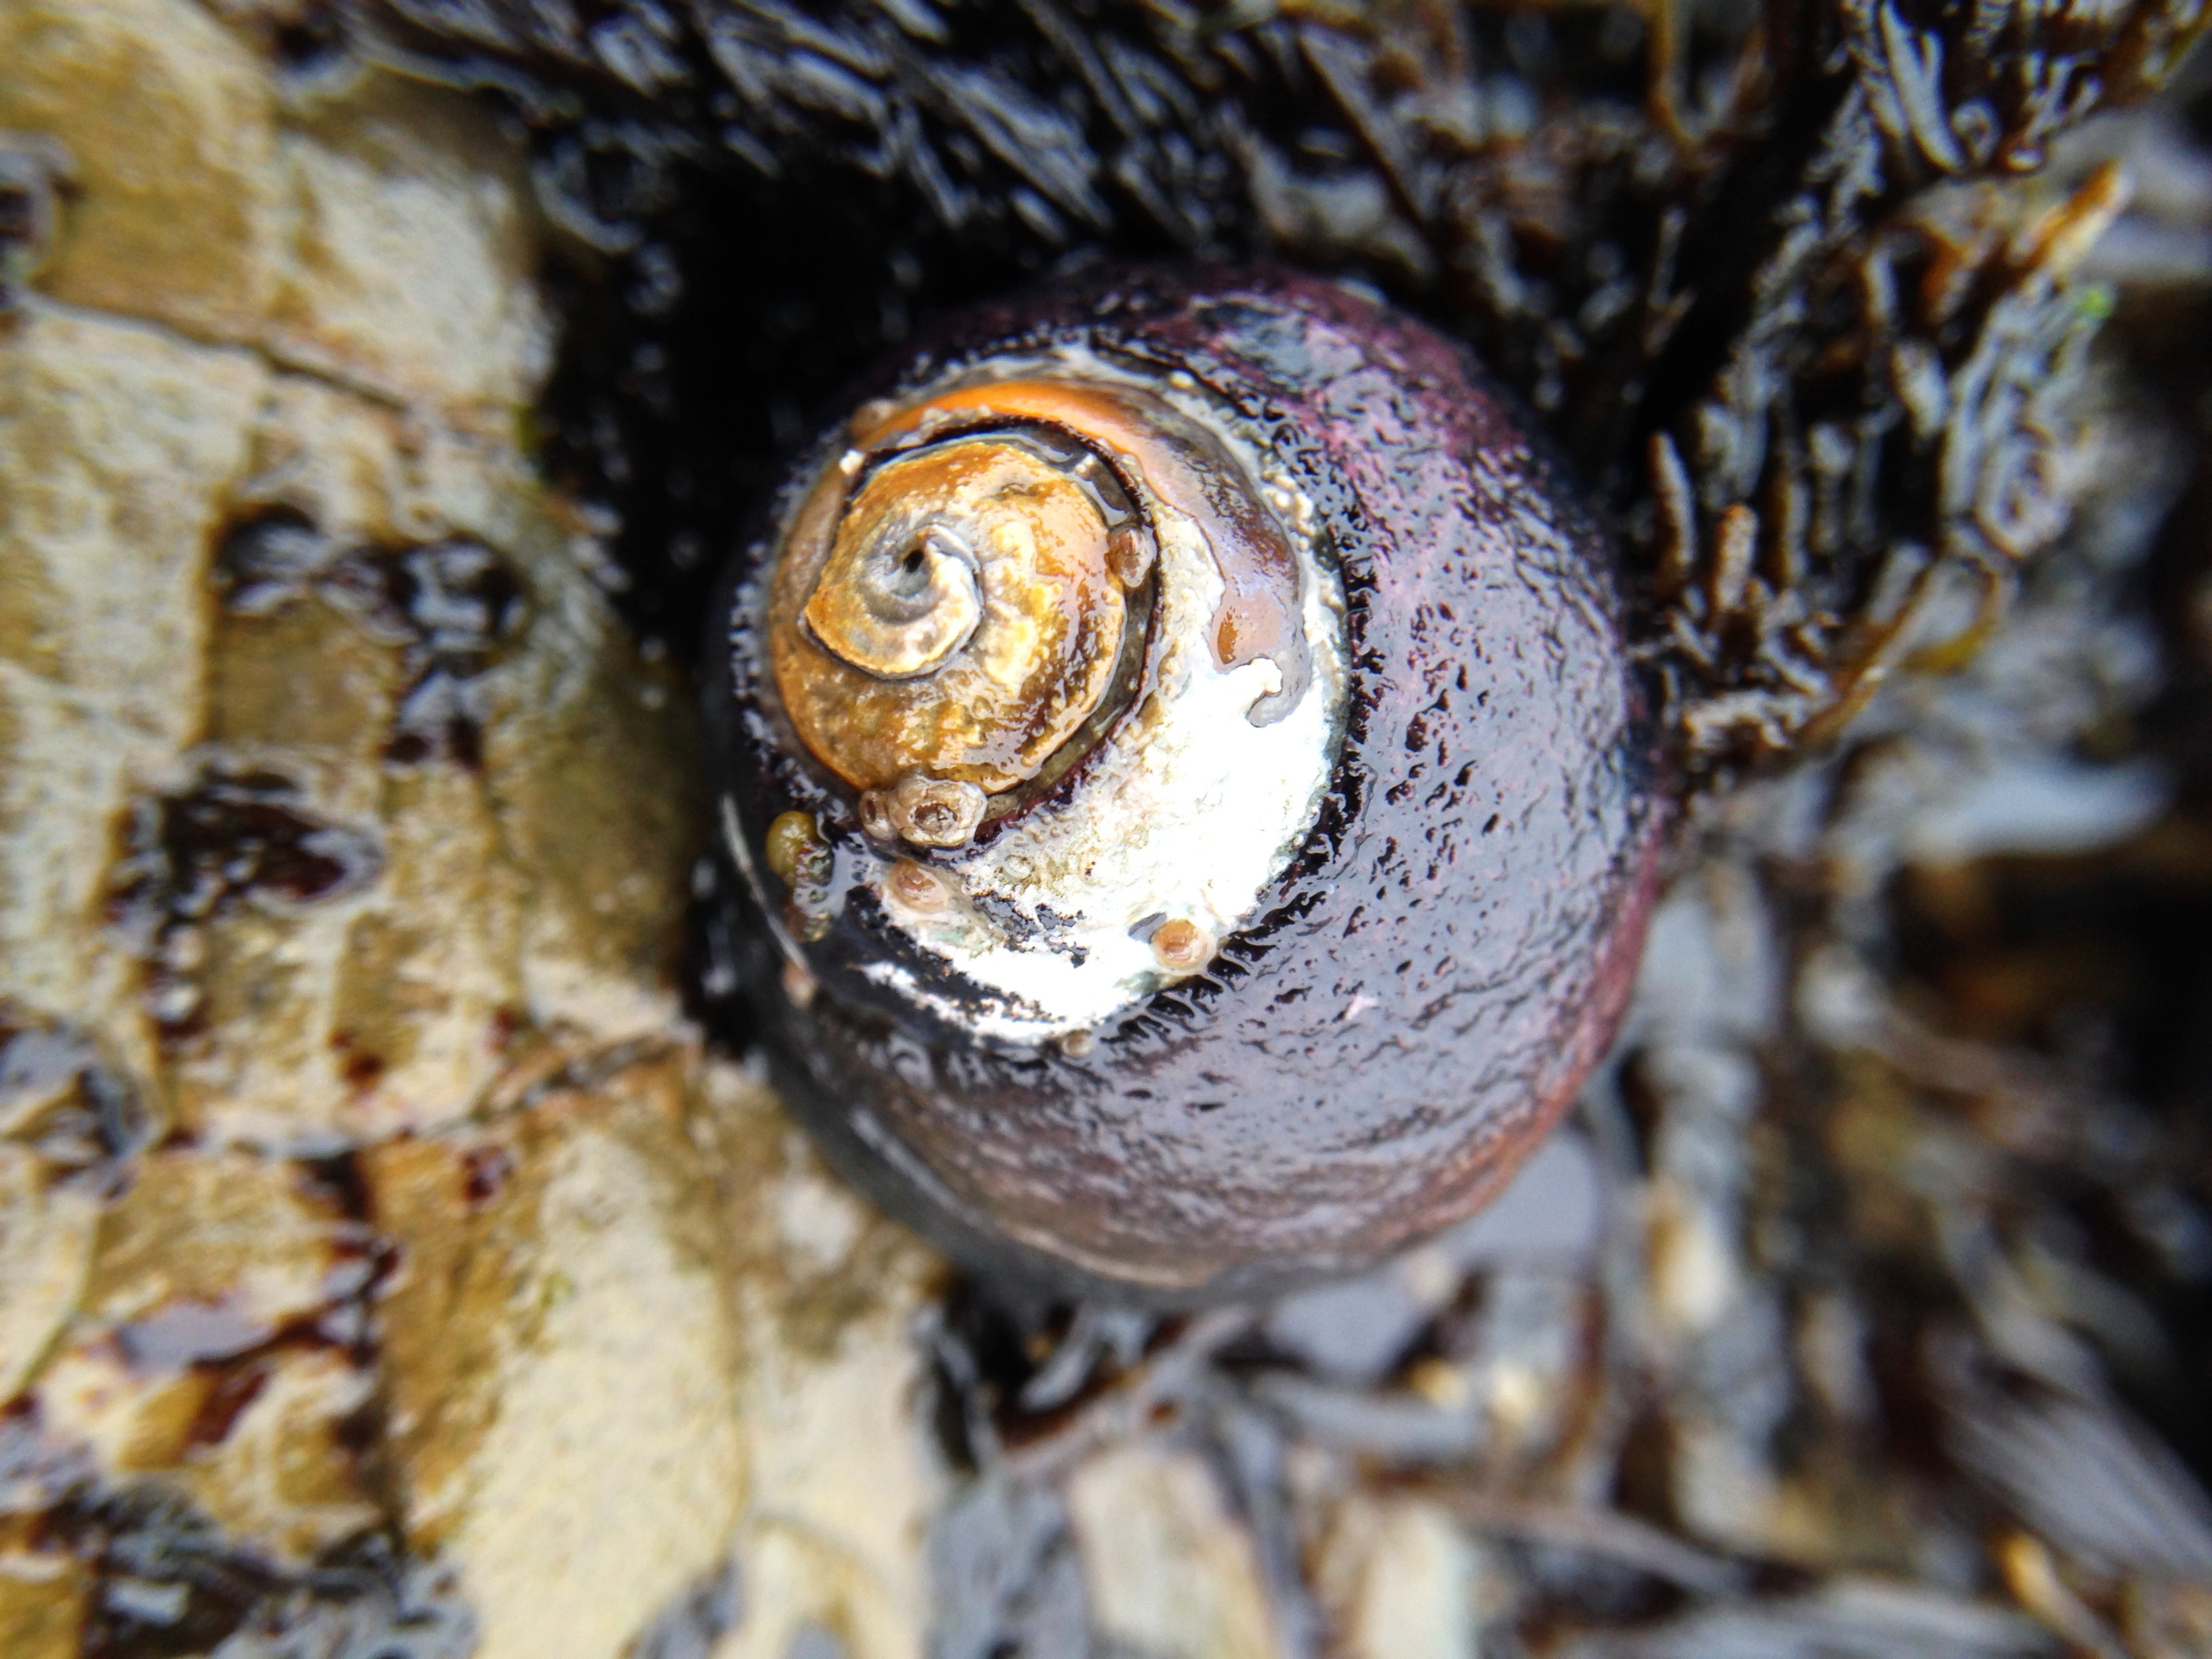 At a Snail's Place - The Weird, the Rare and the Ugly - Bay Nature